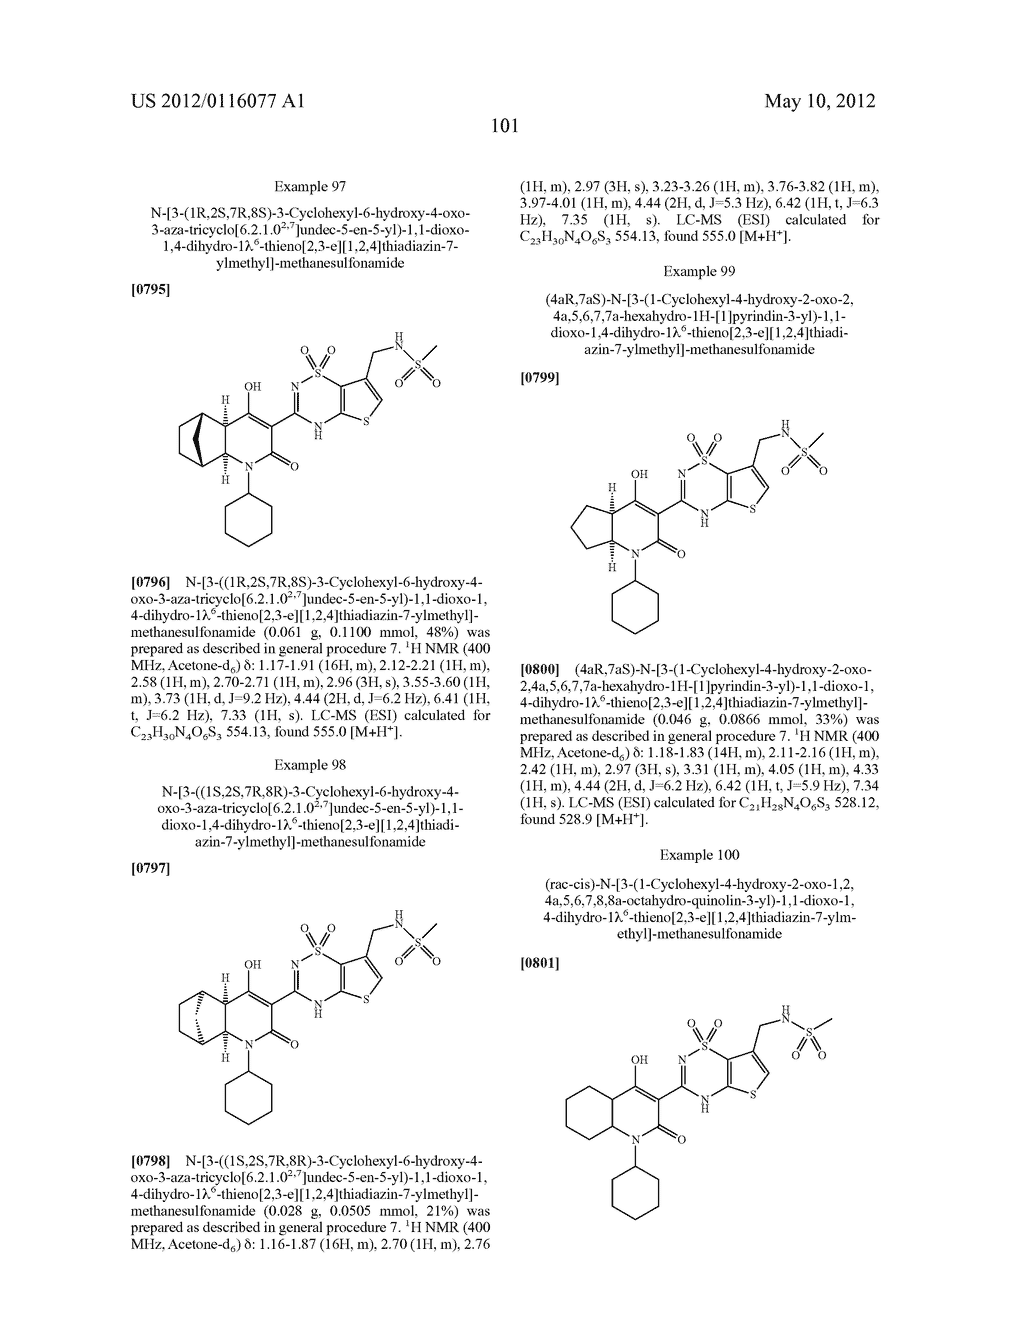 [1,2,4]THIADIAZIN-3-YL ACETIC ACID COMPOUND[[S]] AND METHODS OF MAKING THE     ACETIC ACID COMPOUND - diagram, schematic, and image 102